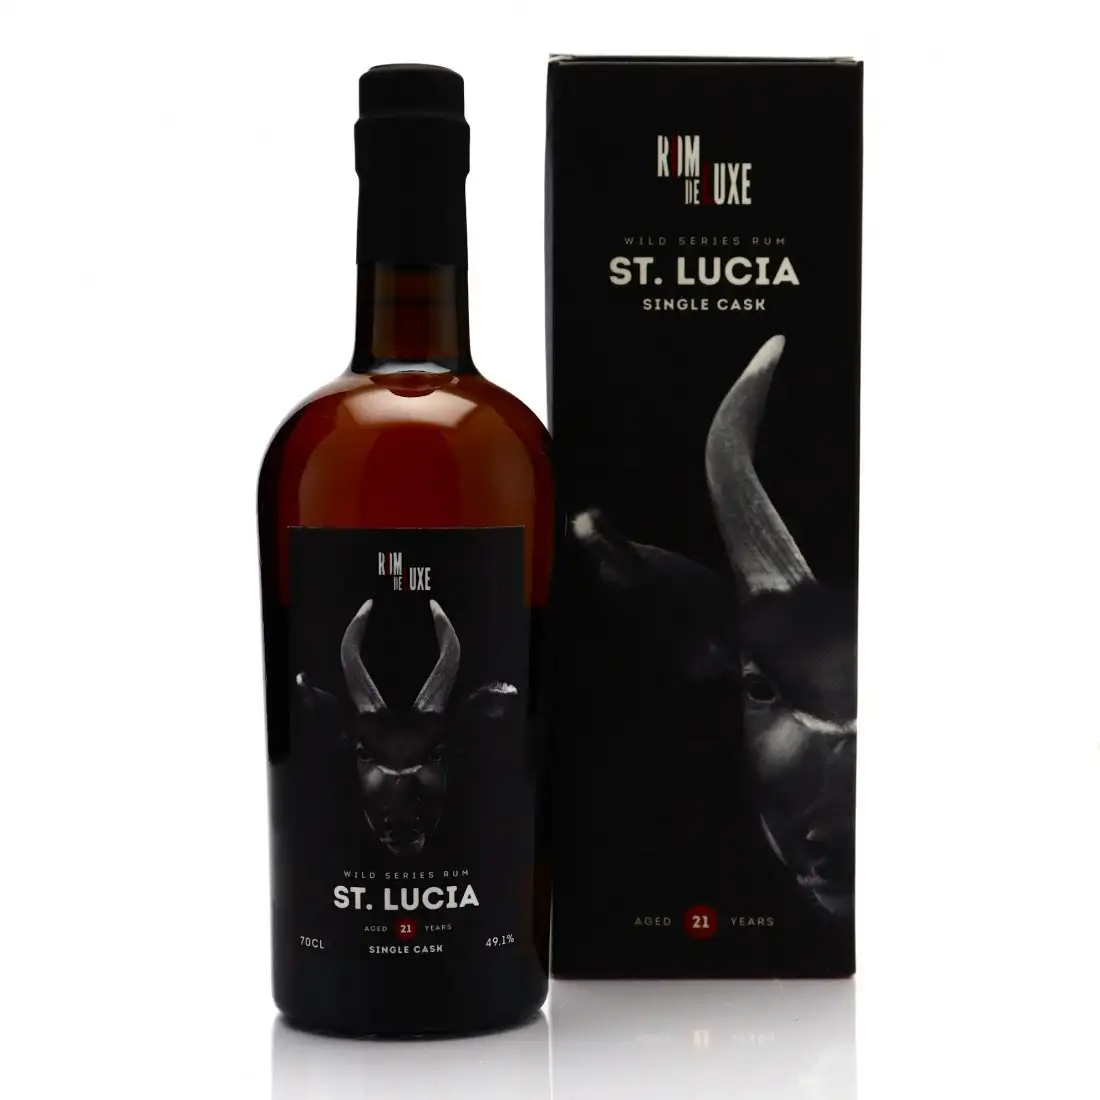 Image of the front of the bottle of the rum Wild Series Rum St. Lucia No. 21 (Unicorn Set Vol 1) SLRP